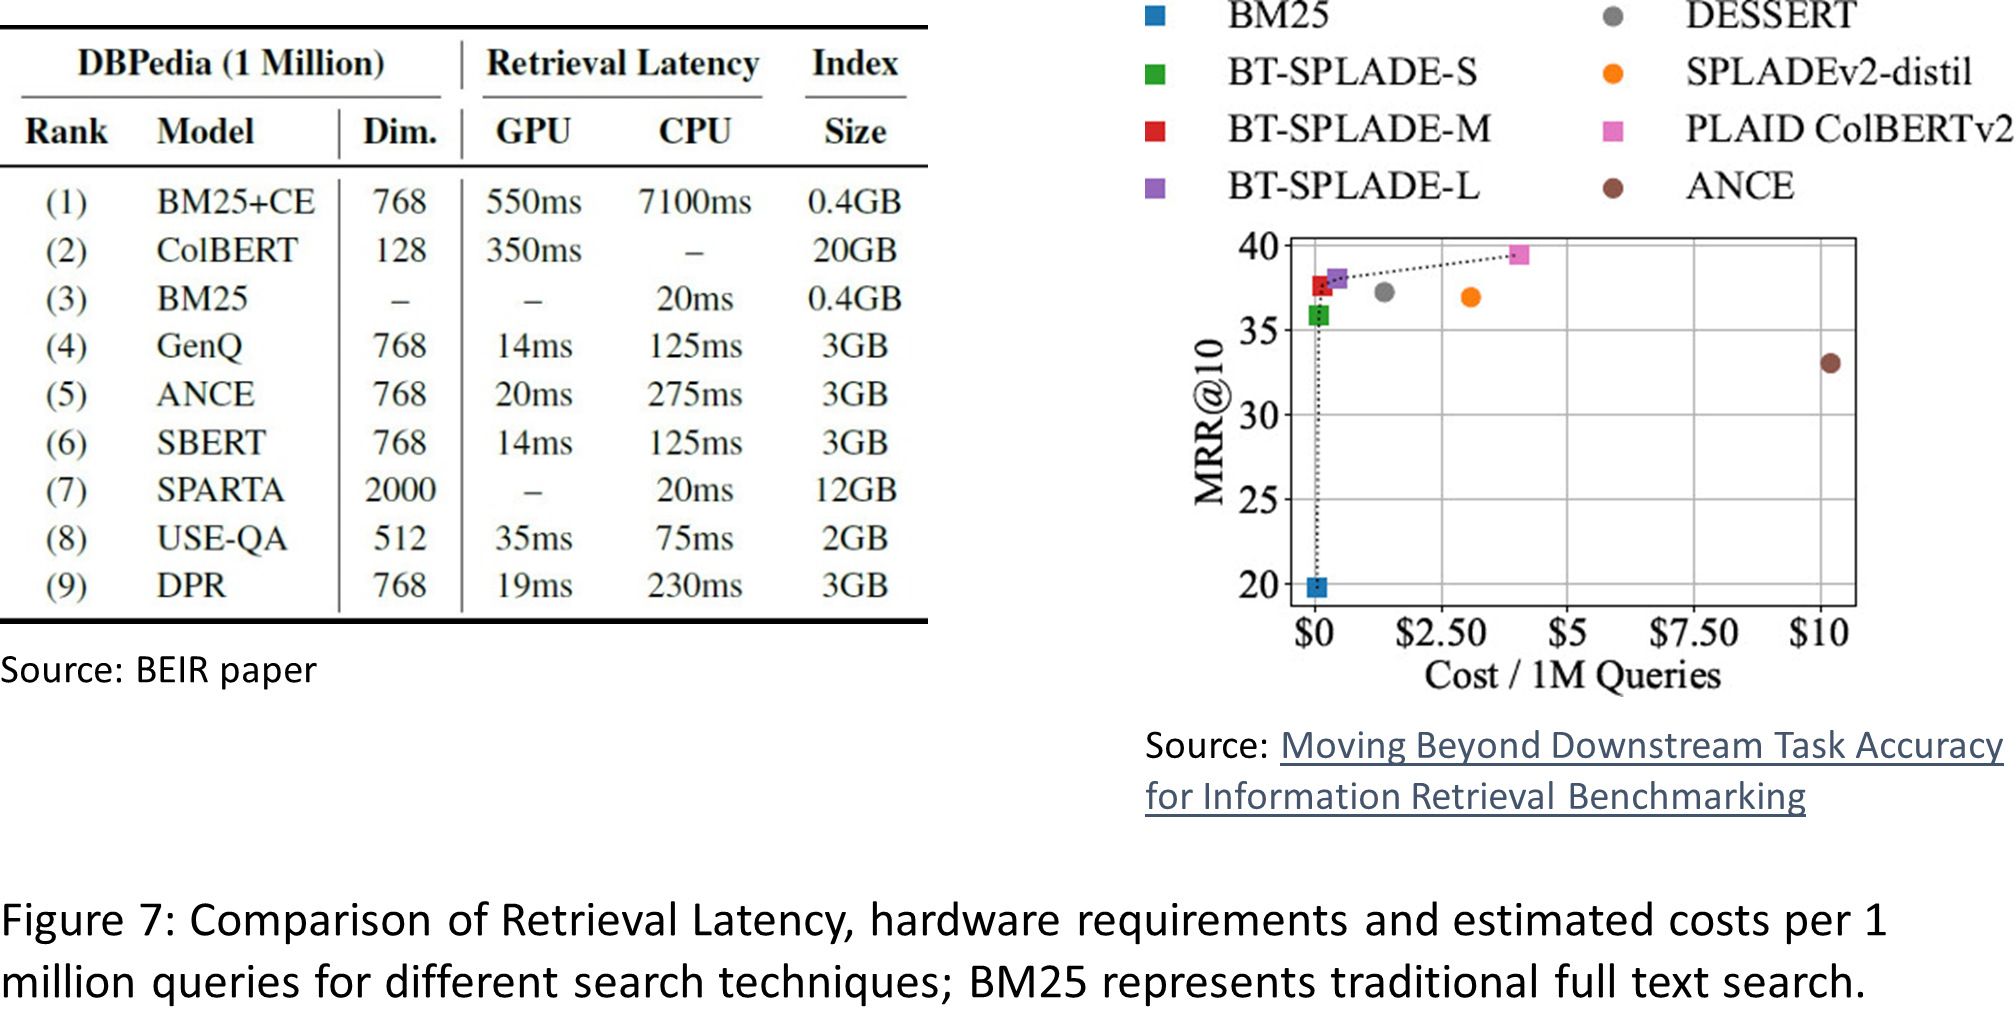 Comparison of Retrieval Latency, hardware requirements and estimated costs per 1 million queries for different search techniques